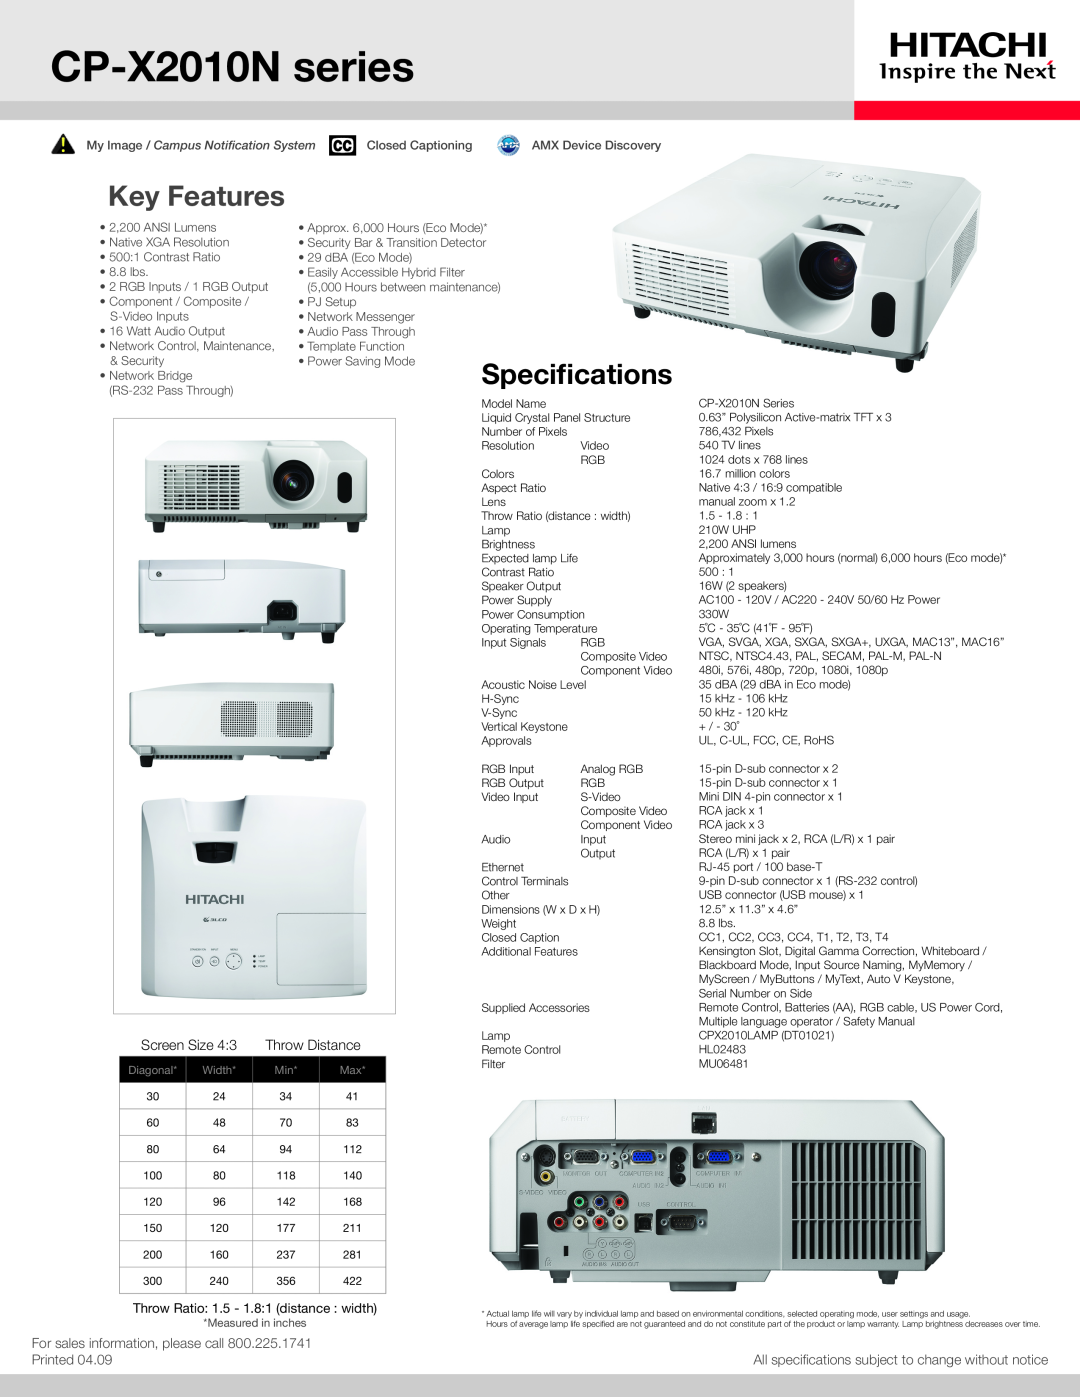 Hitachi specifications CP-X2010N series, Key Features, Specifications, Screen Size, Throw Distance, Printed, Diagonal 